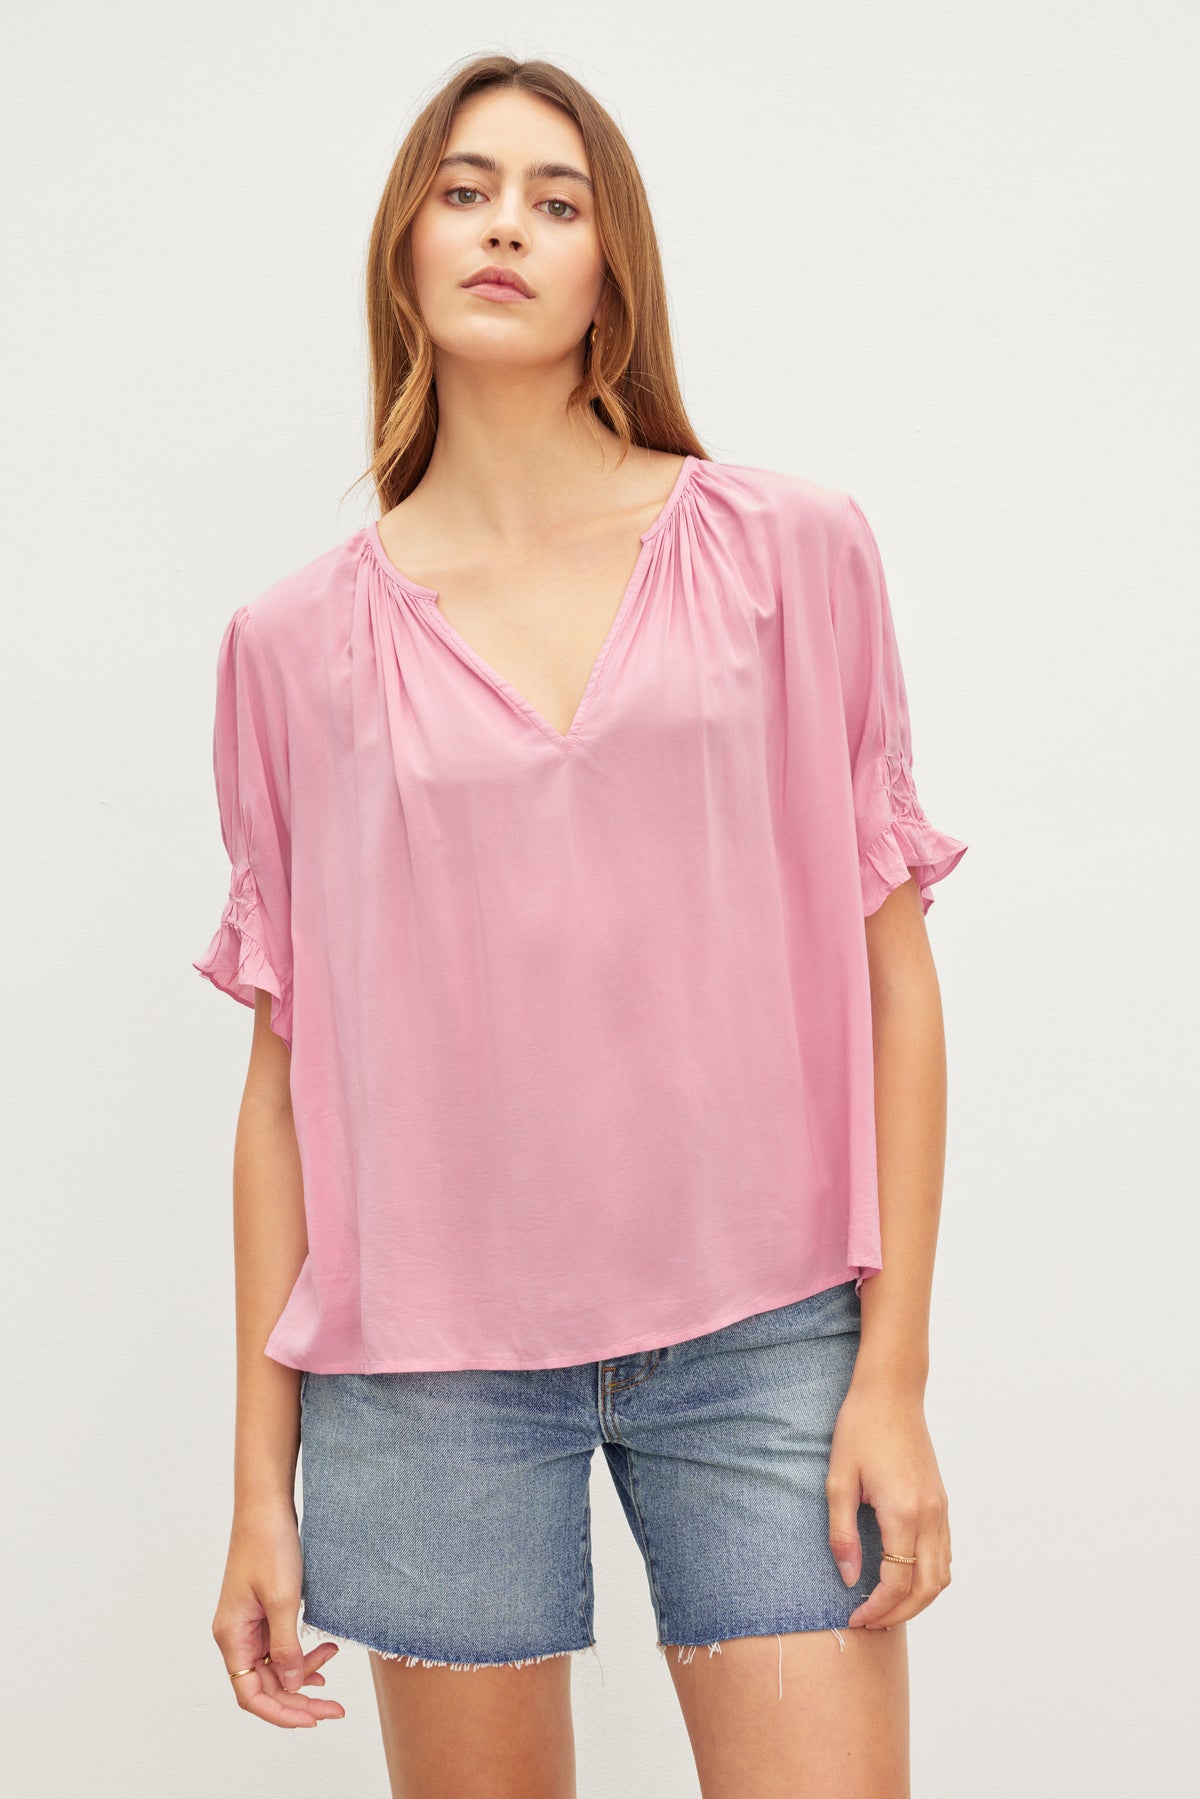   Woman in a CALISSA SPLIT NECK BLOUSE by Velvet by Graham & Spencer with shirred detailing and denim shorts standing against a neutral background. 